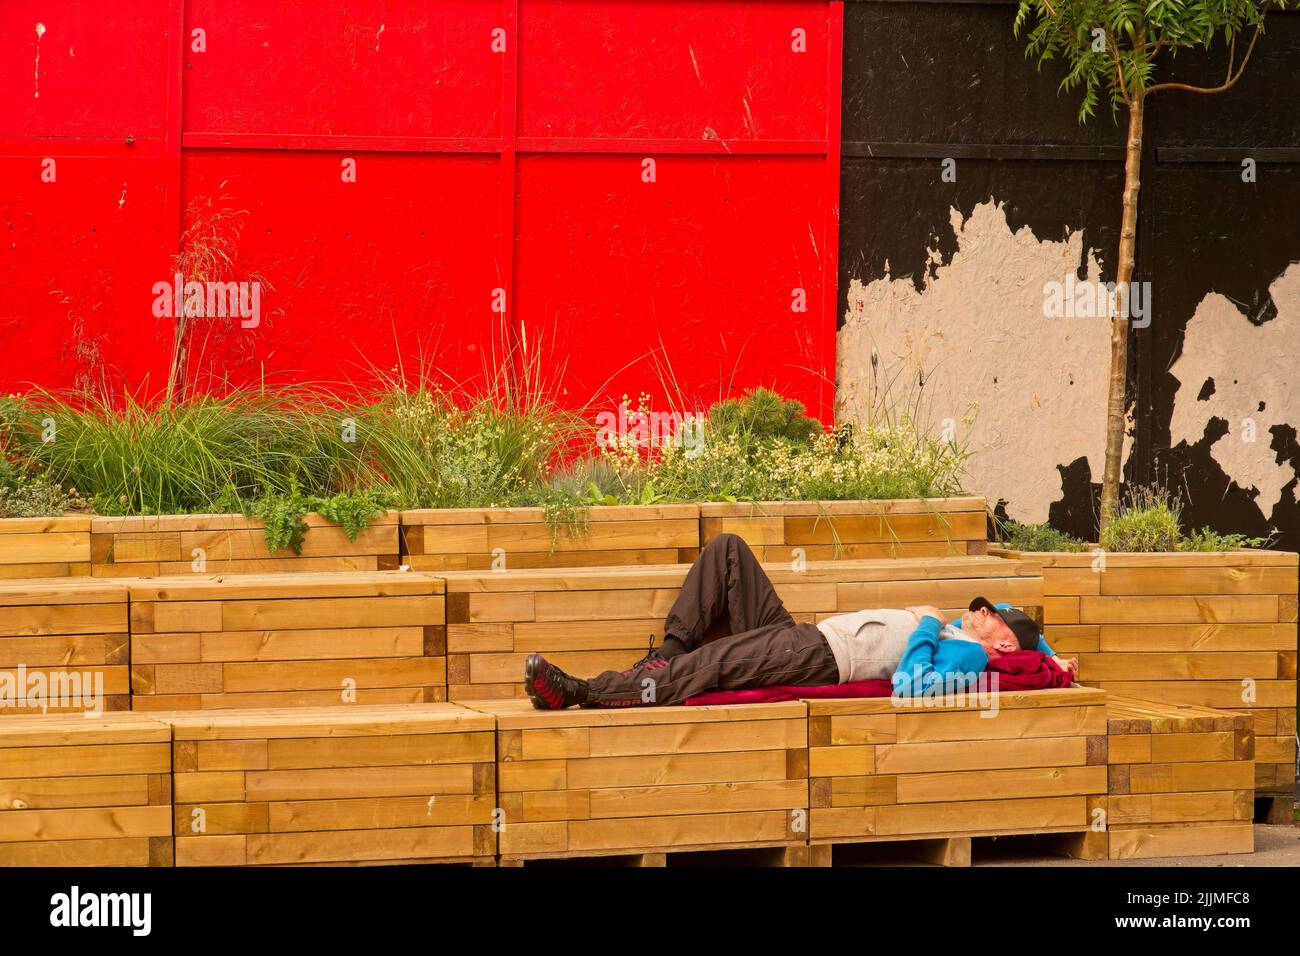 Swansea Wales UK Man taking an impromptu nap outdoors on wooden structure. Red hoarding and plants in background. Stock Photo